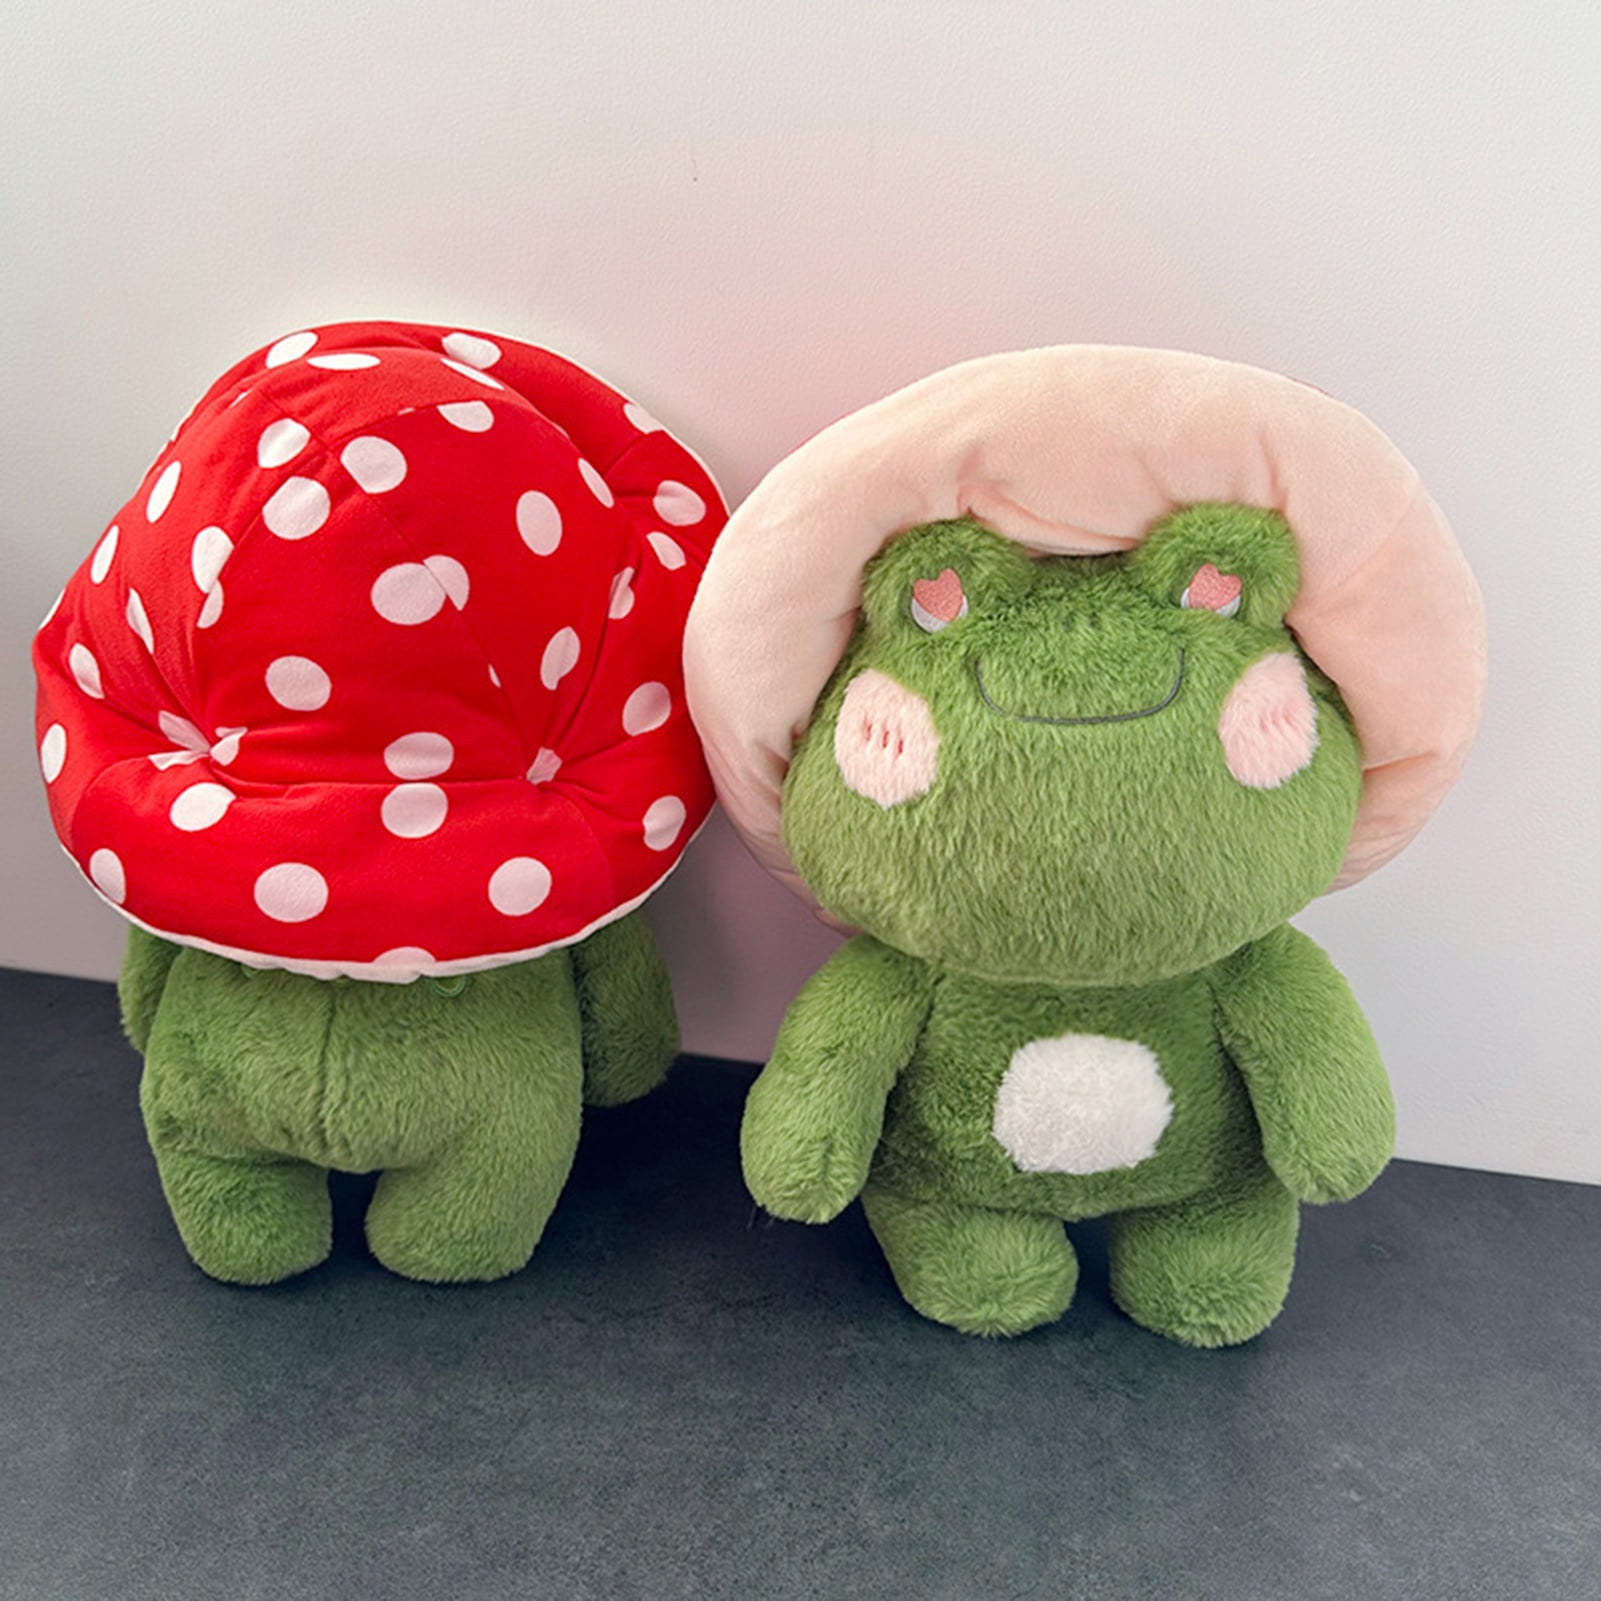  Frog Plush Toys, 7.8 Cute Frog with Red Mushroom Hat